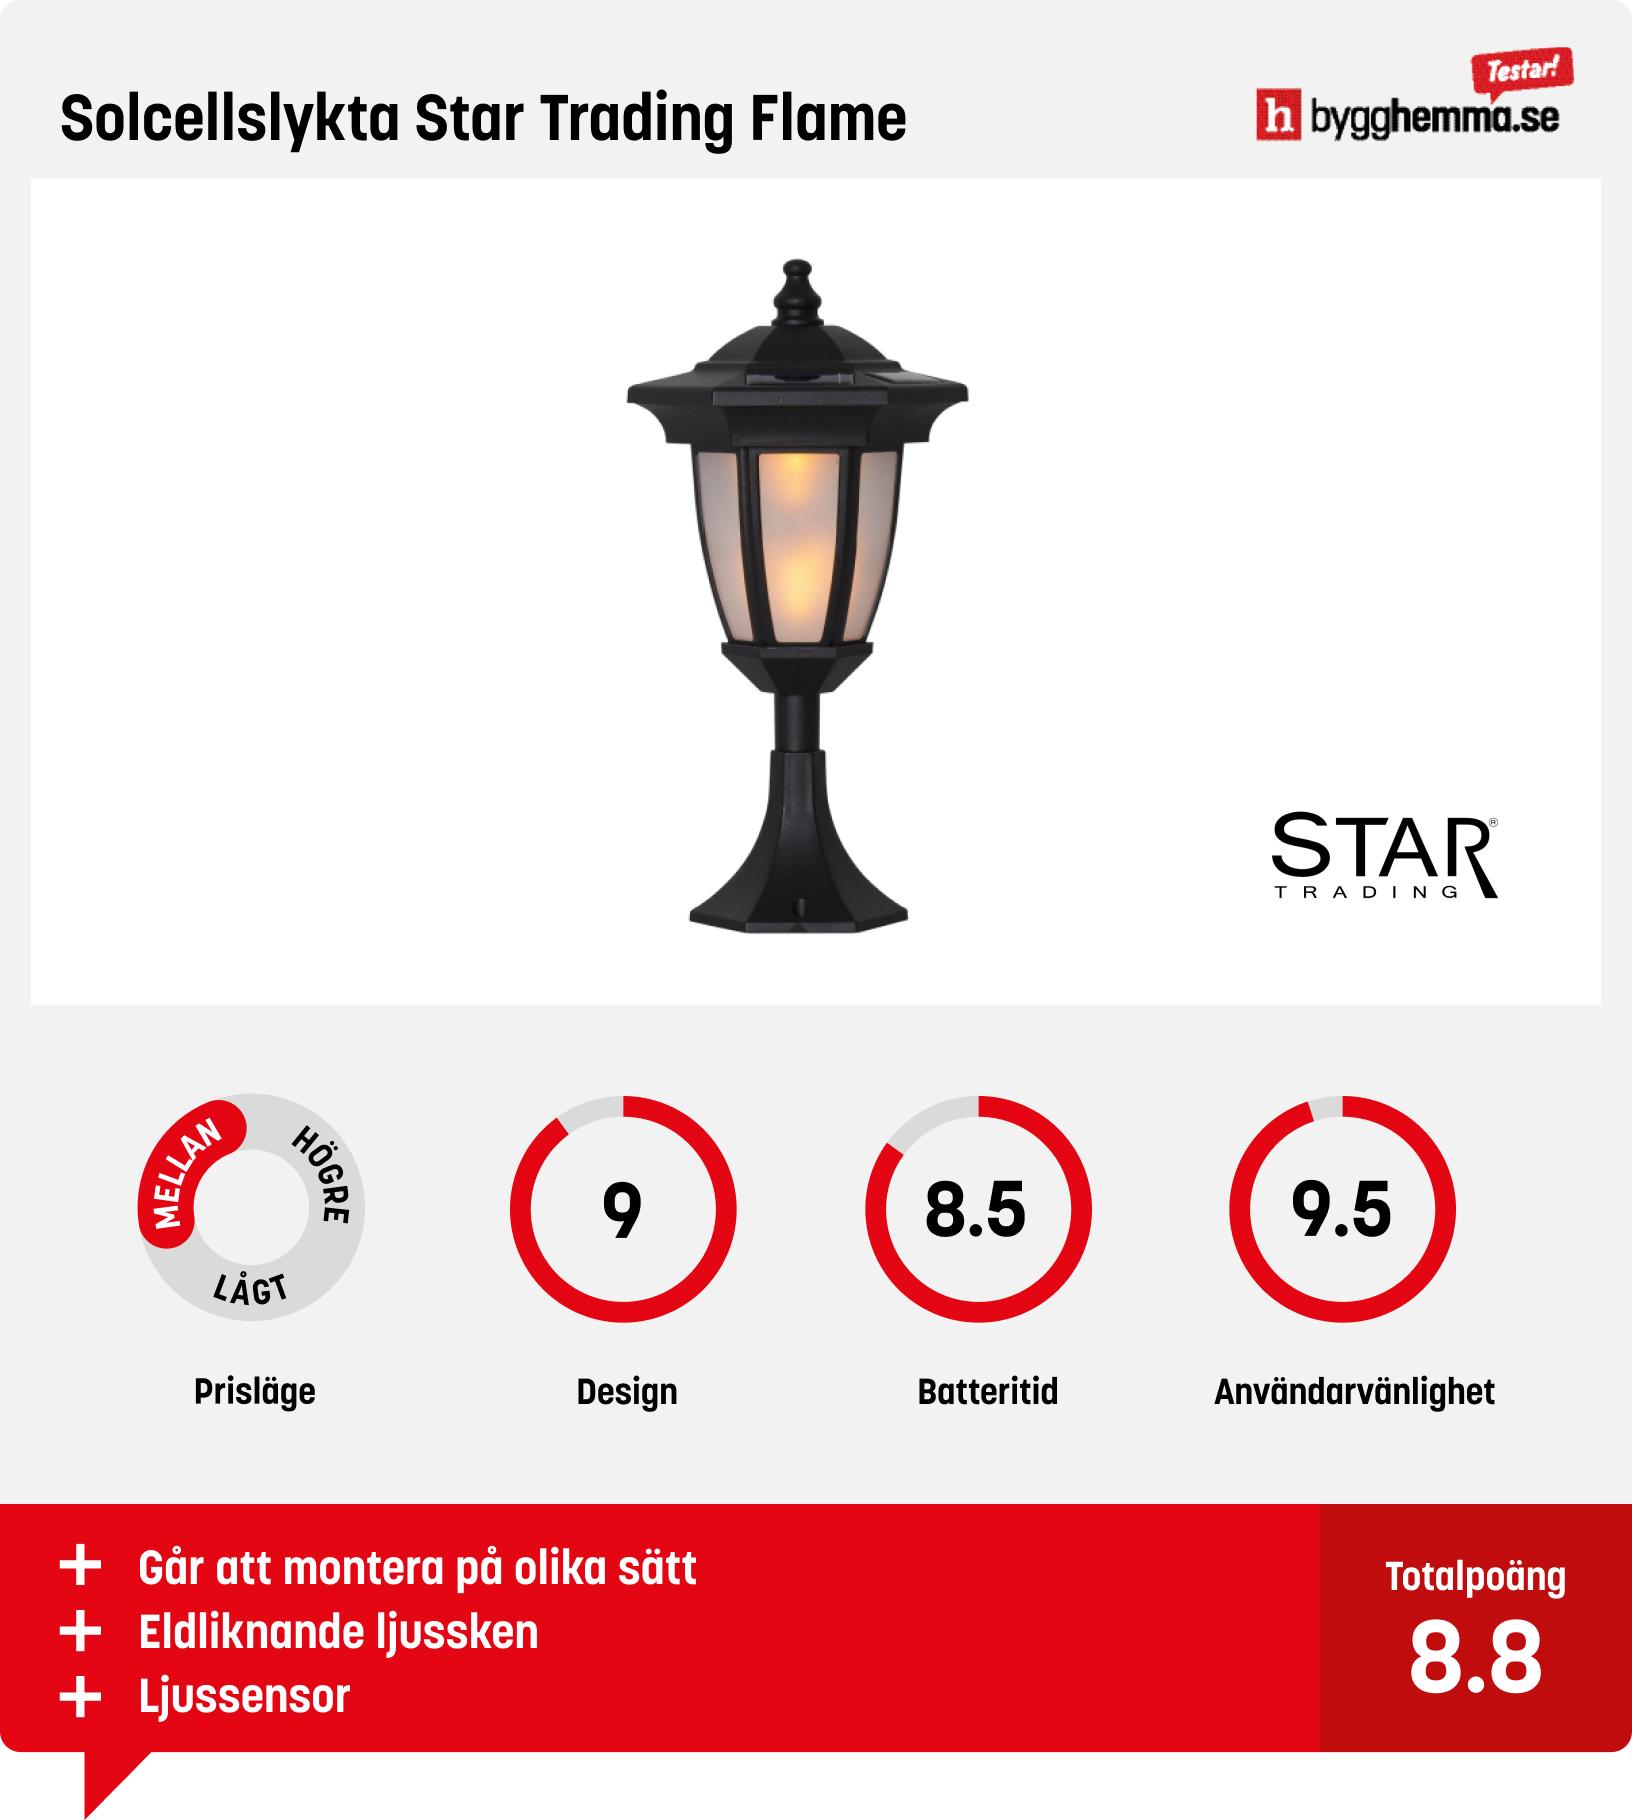 Solcellslampa utomhus bäst i test - Solcellslykta Star Trading Flame